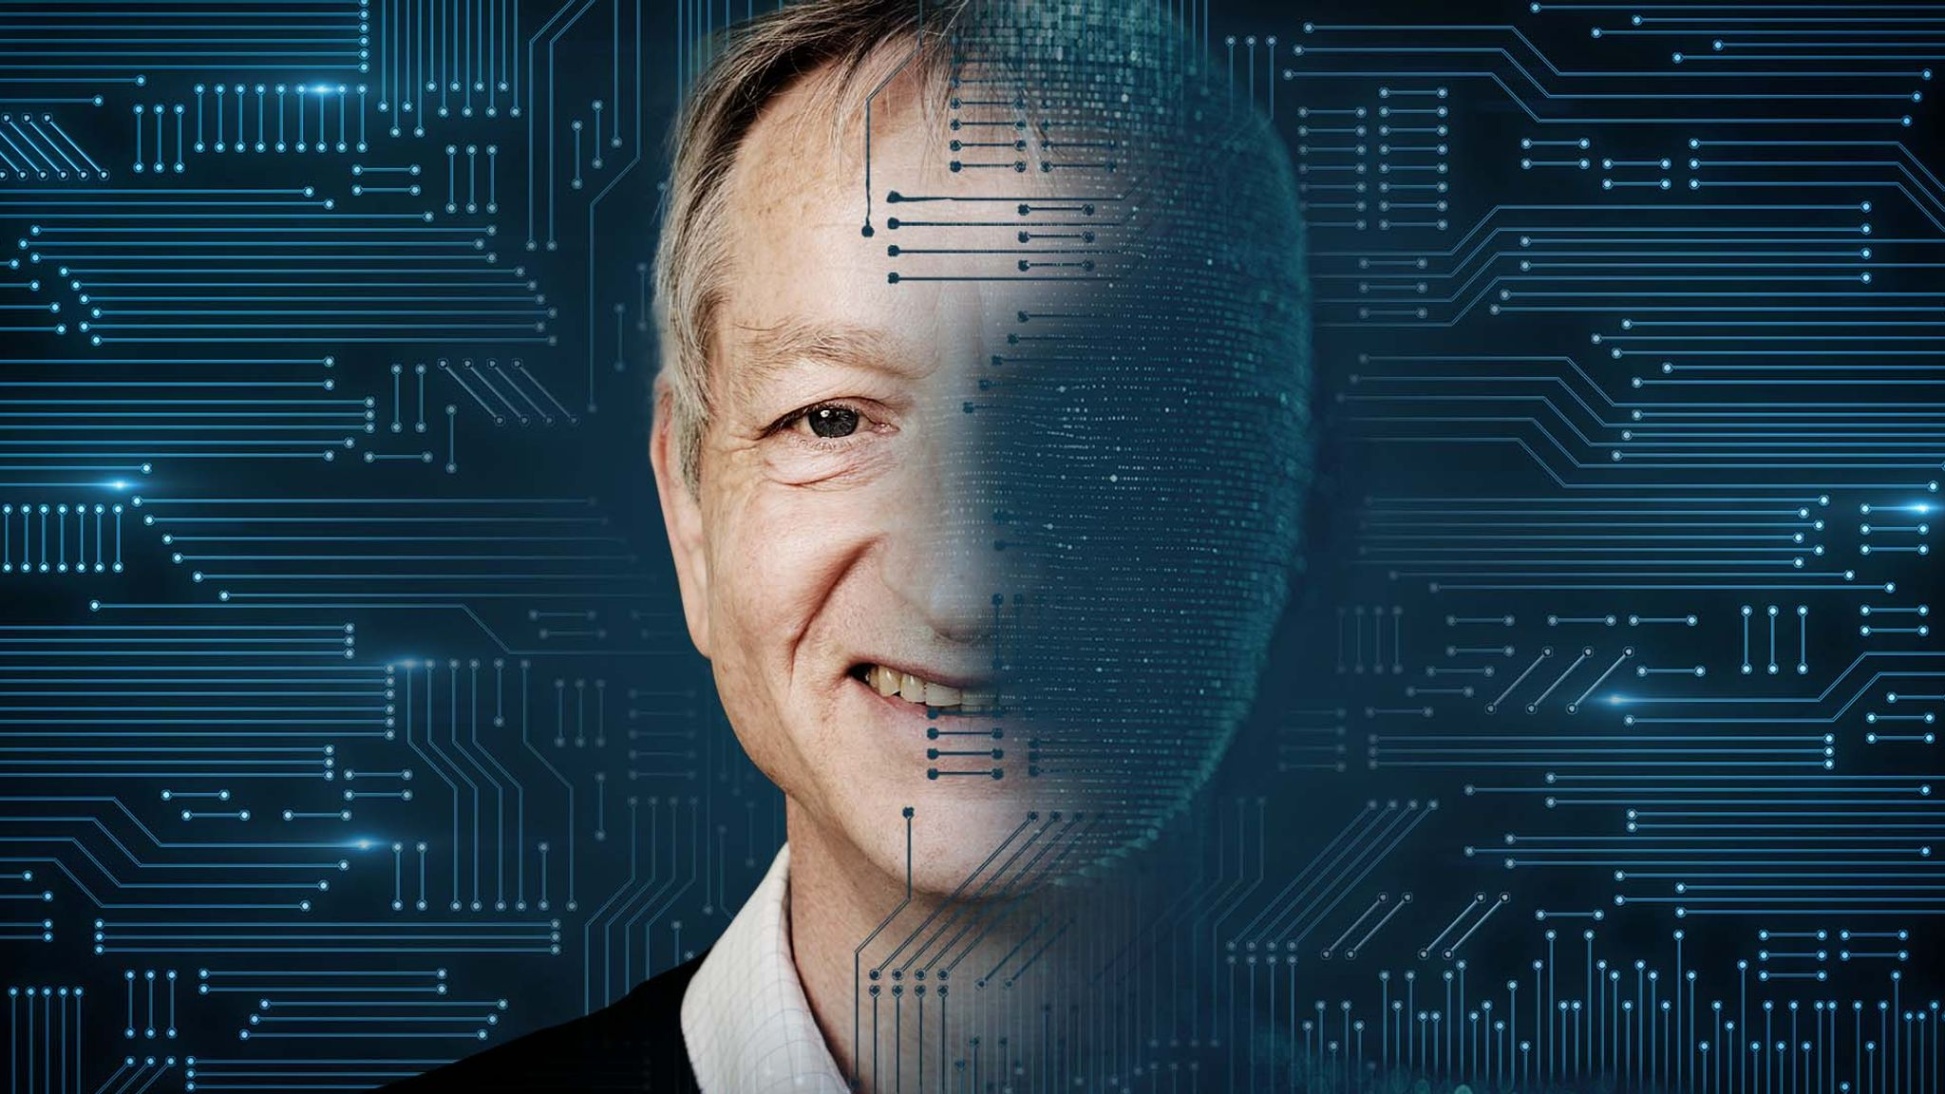 The Father Of Deep Learning: Meet Geoffrey Hinton, The Genius Behind AI’s Future